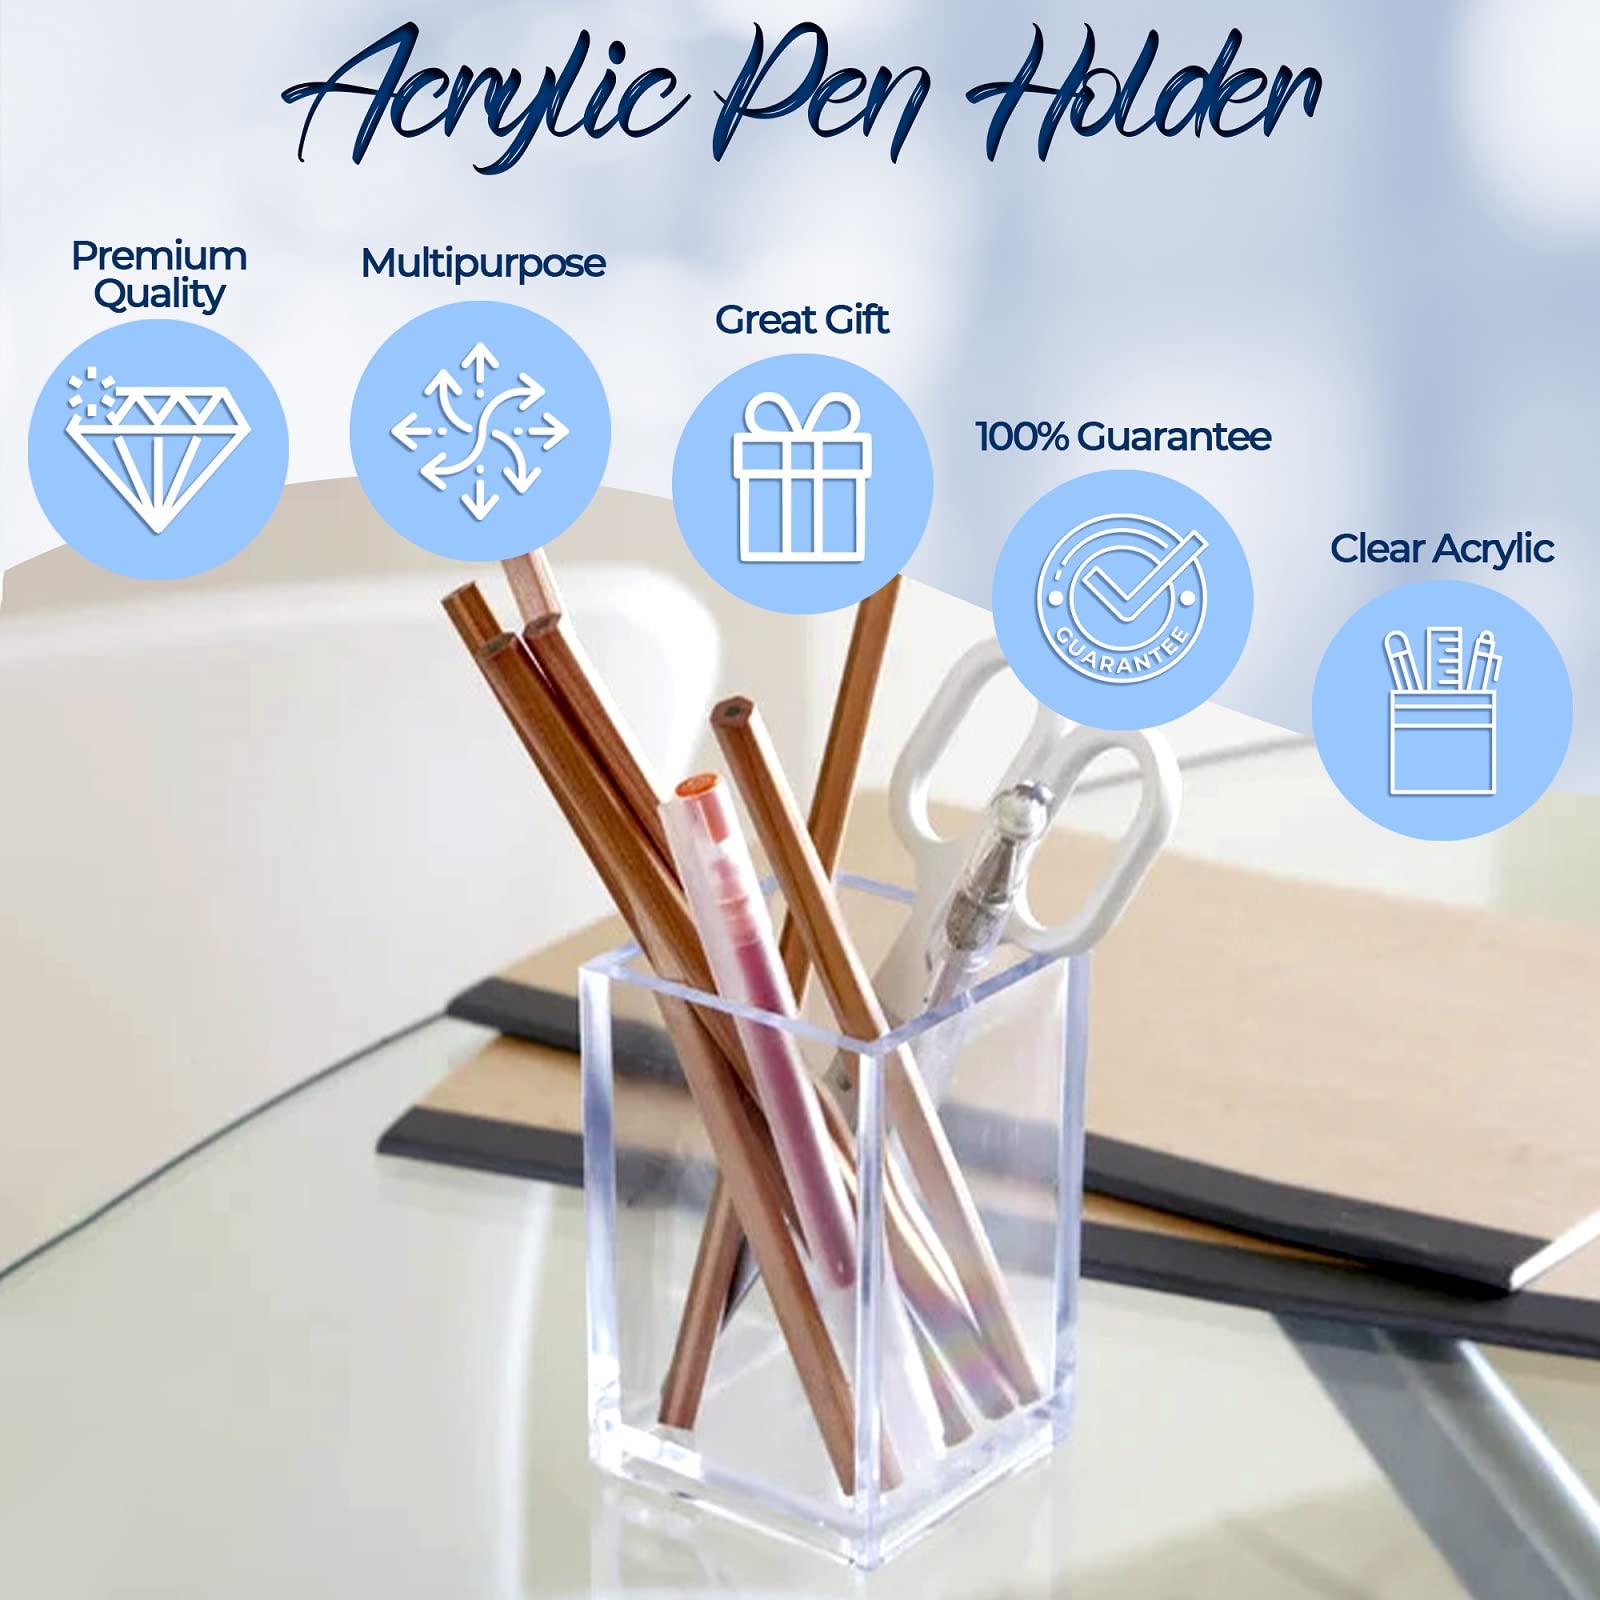 Acrylic Pen Holder for Desk - Includes Metal Keychain – Acrylic Pencil Holder Clear Makeup Brush Holder – Acrylic Desk Accessories, Stationery Organizer for Office Desk Accessory - 1-Piece, 2.6x2.6x4"